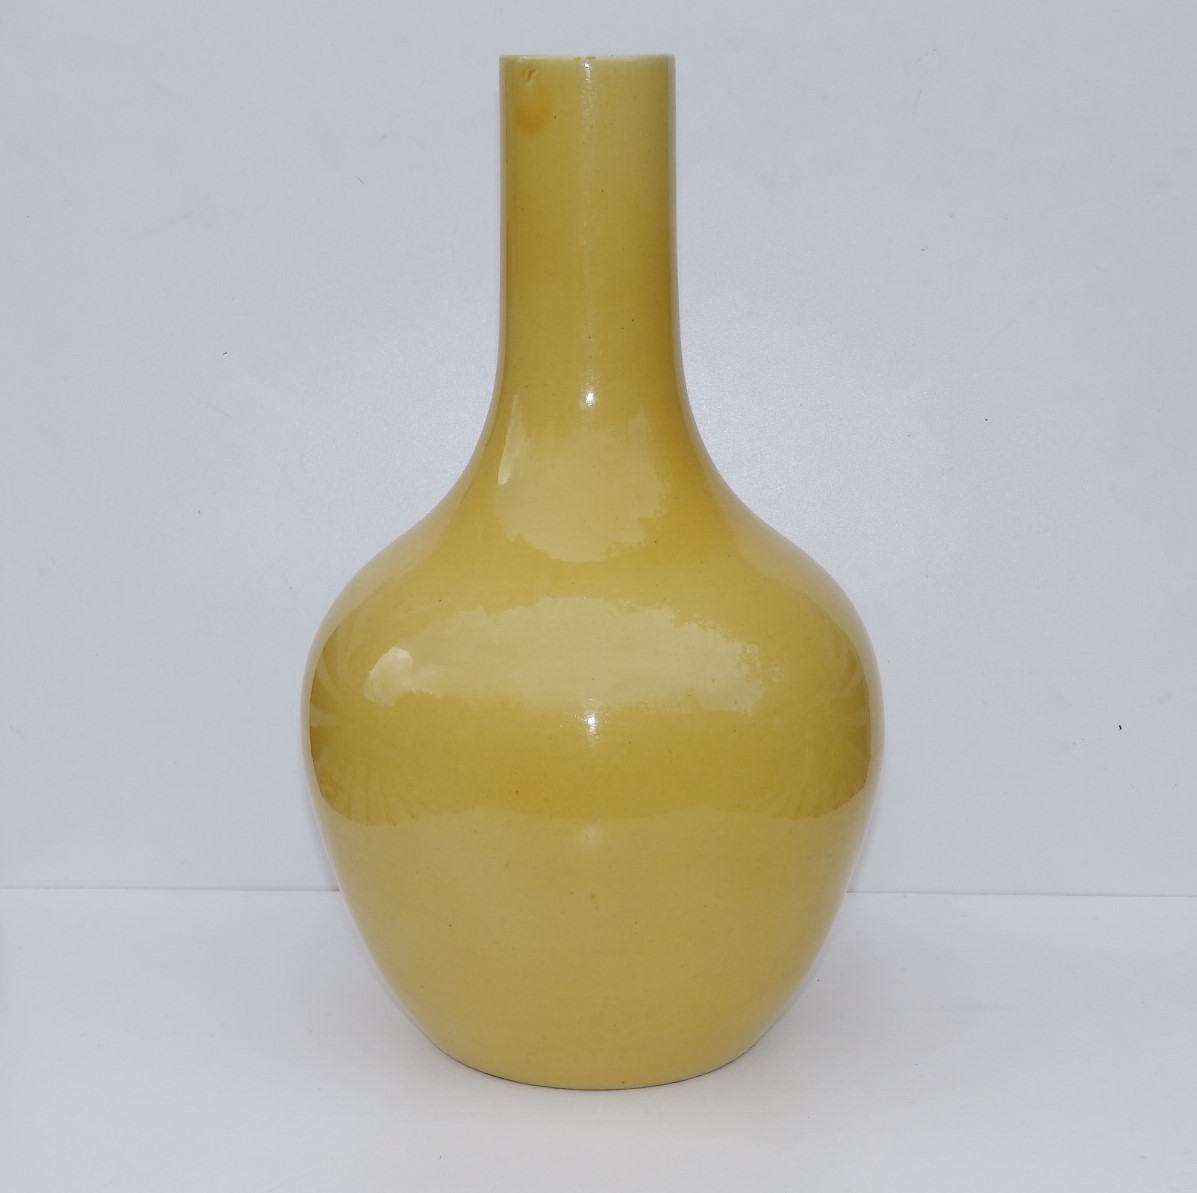 An 18thC Chinese Imperial yellow glazed porcelain bottle vase, 15.5" high - base drilled for use